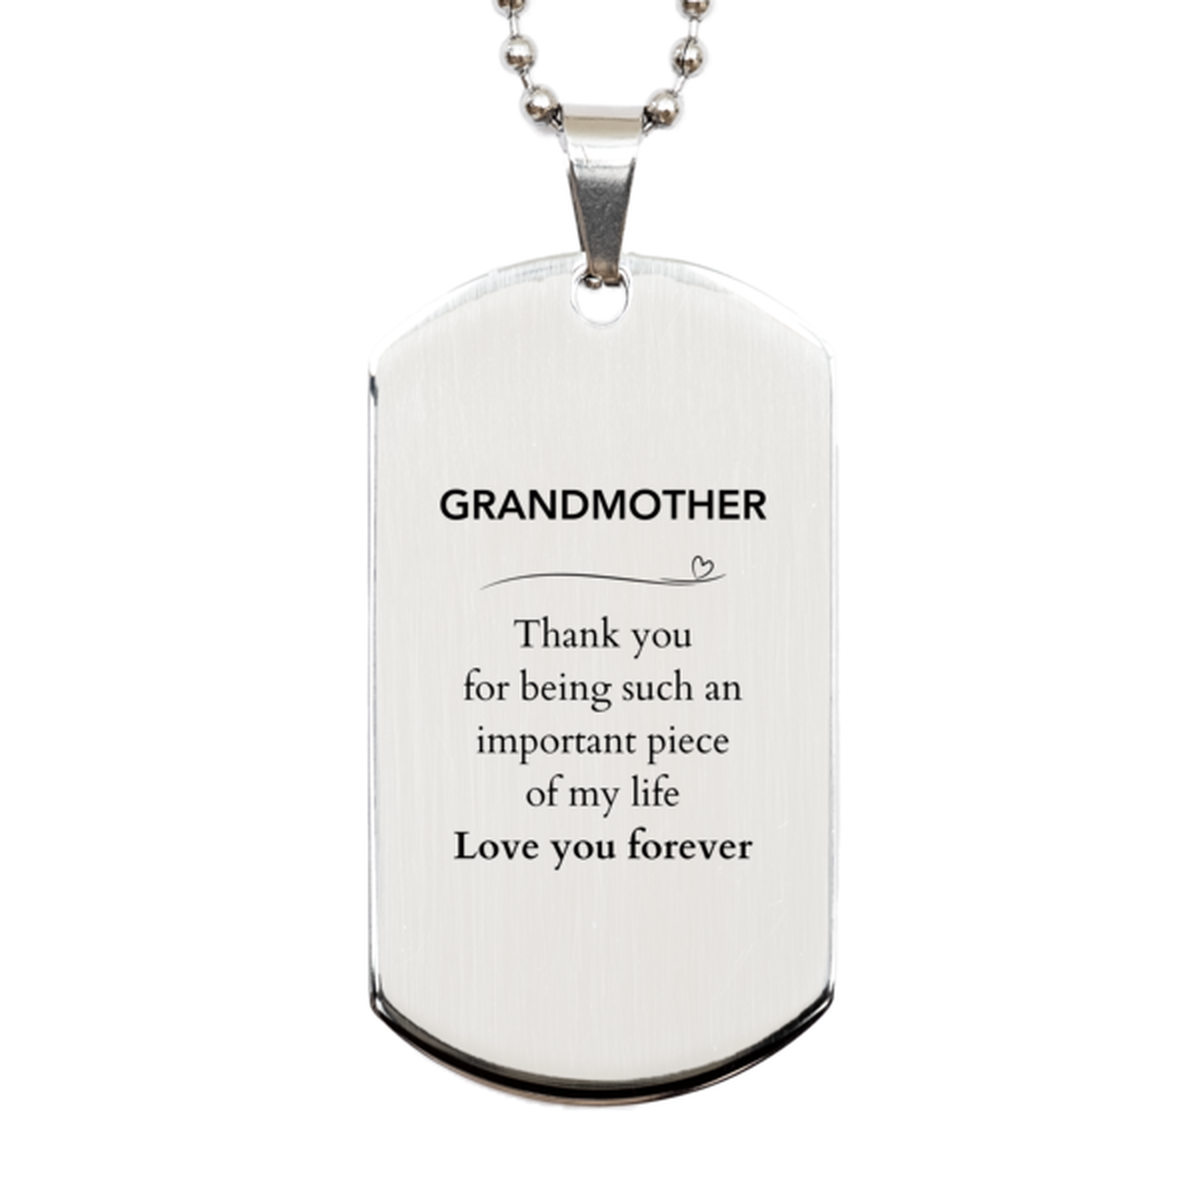 Appropriate Grandmother Silver Dog Tag Epic Birthday Gifts for Grandmother Thank you for being such an important piece of my life Grandmother Christmas Mothers Fathers Day